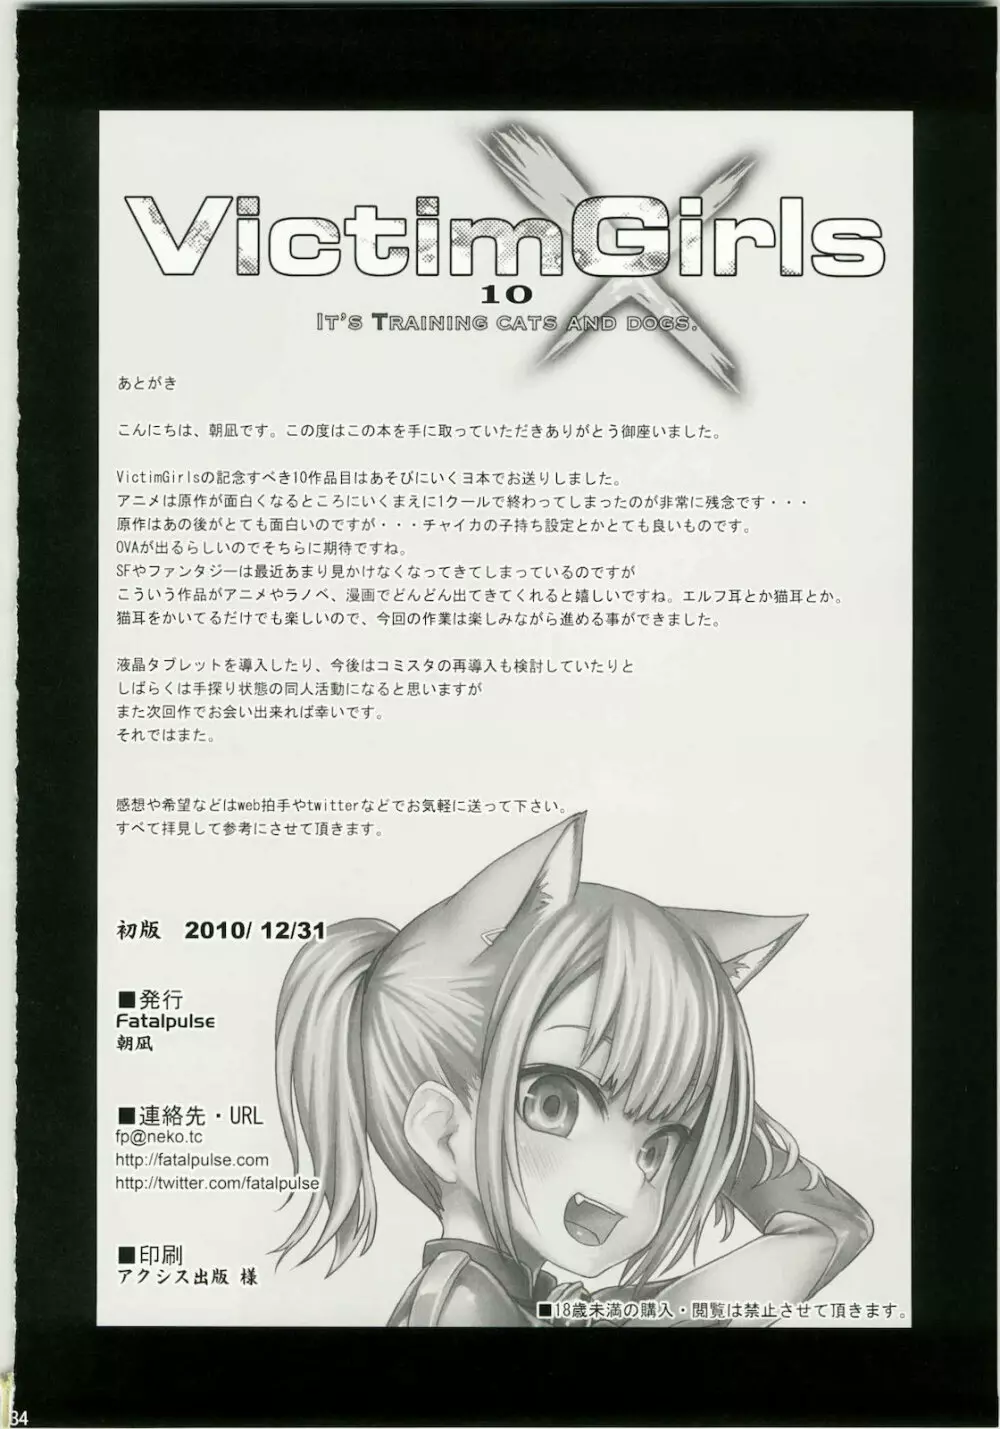 Victim Girls 10 IT’S TRAINING CATS AND DOGS. 34ページ